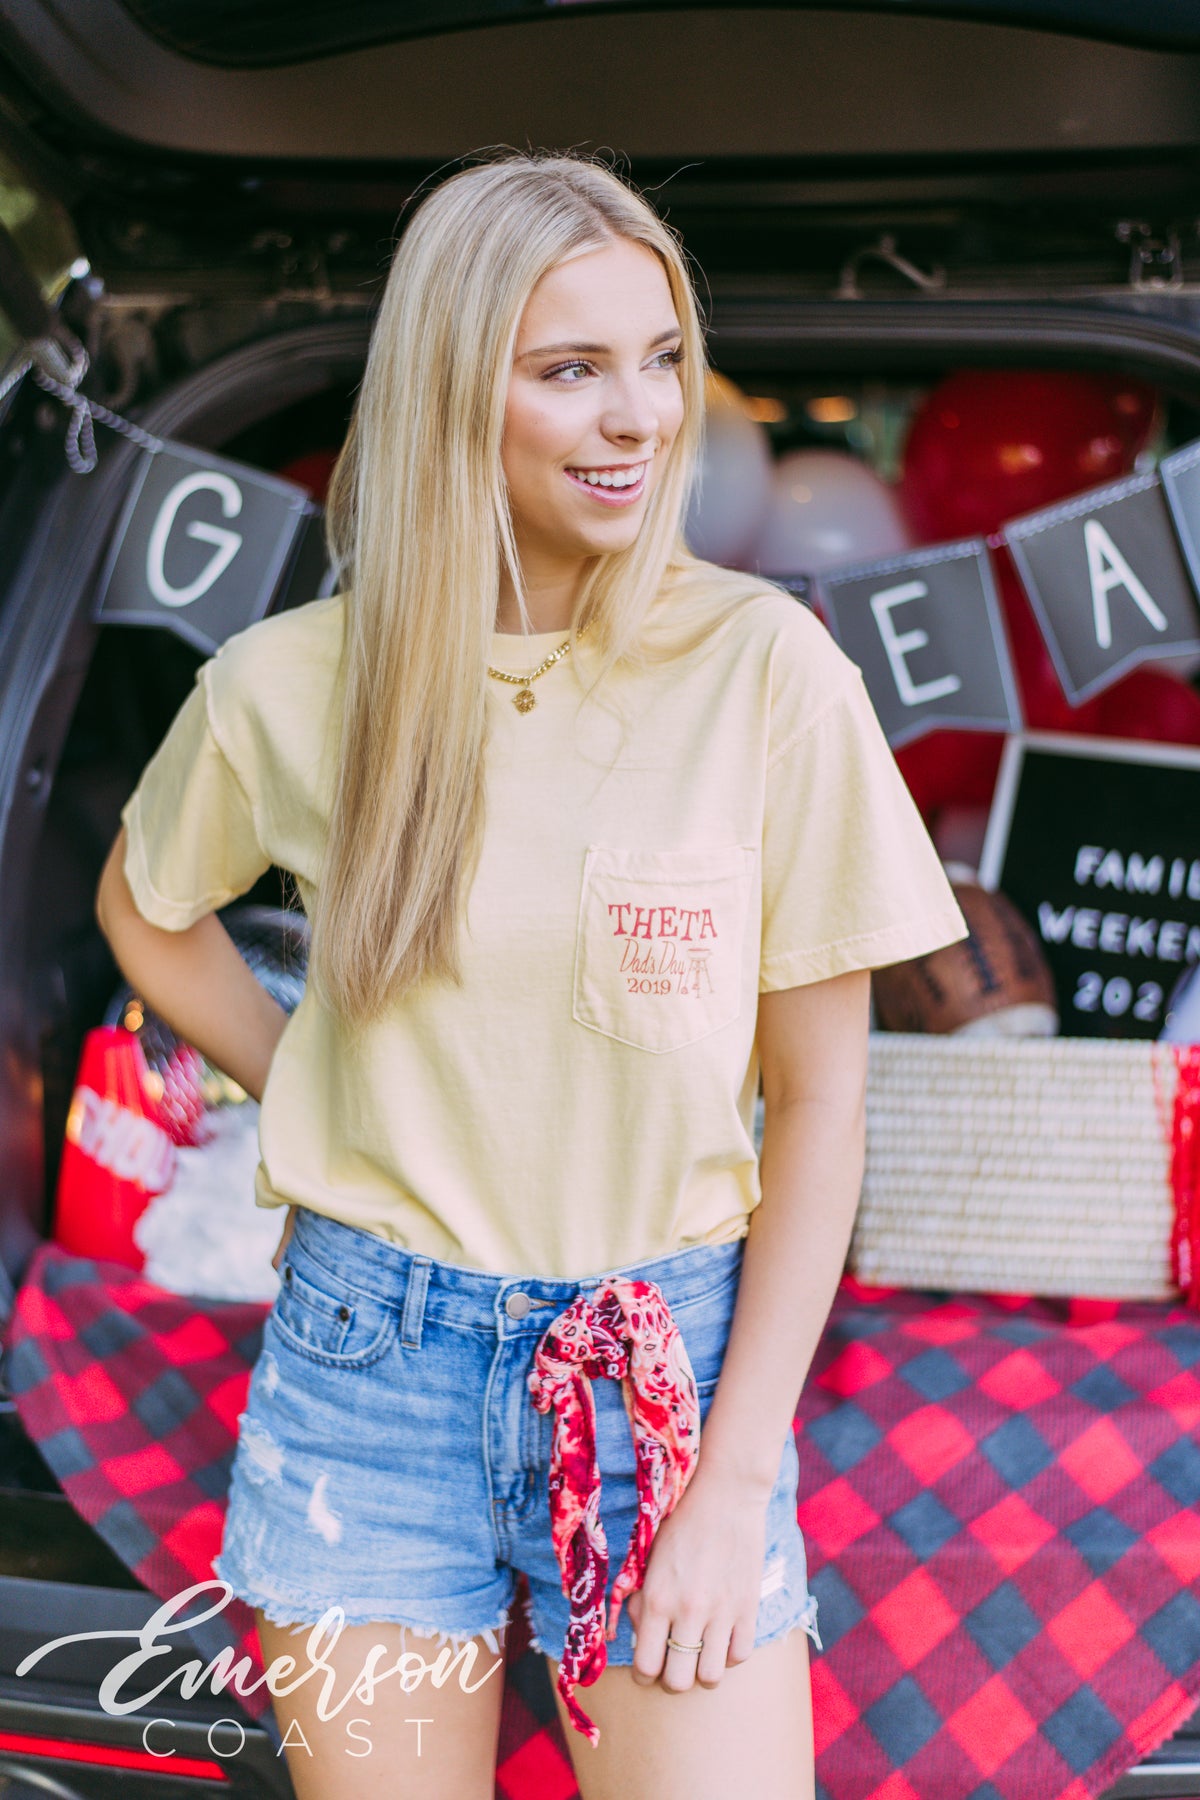 Kappa Alpha Theta Raised By The Best Dads Day Tee